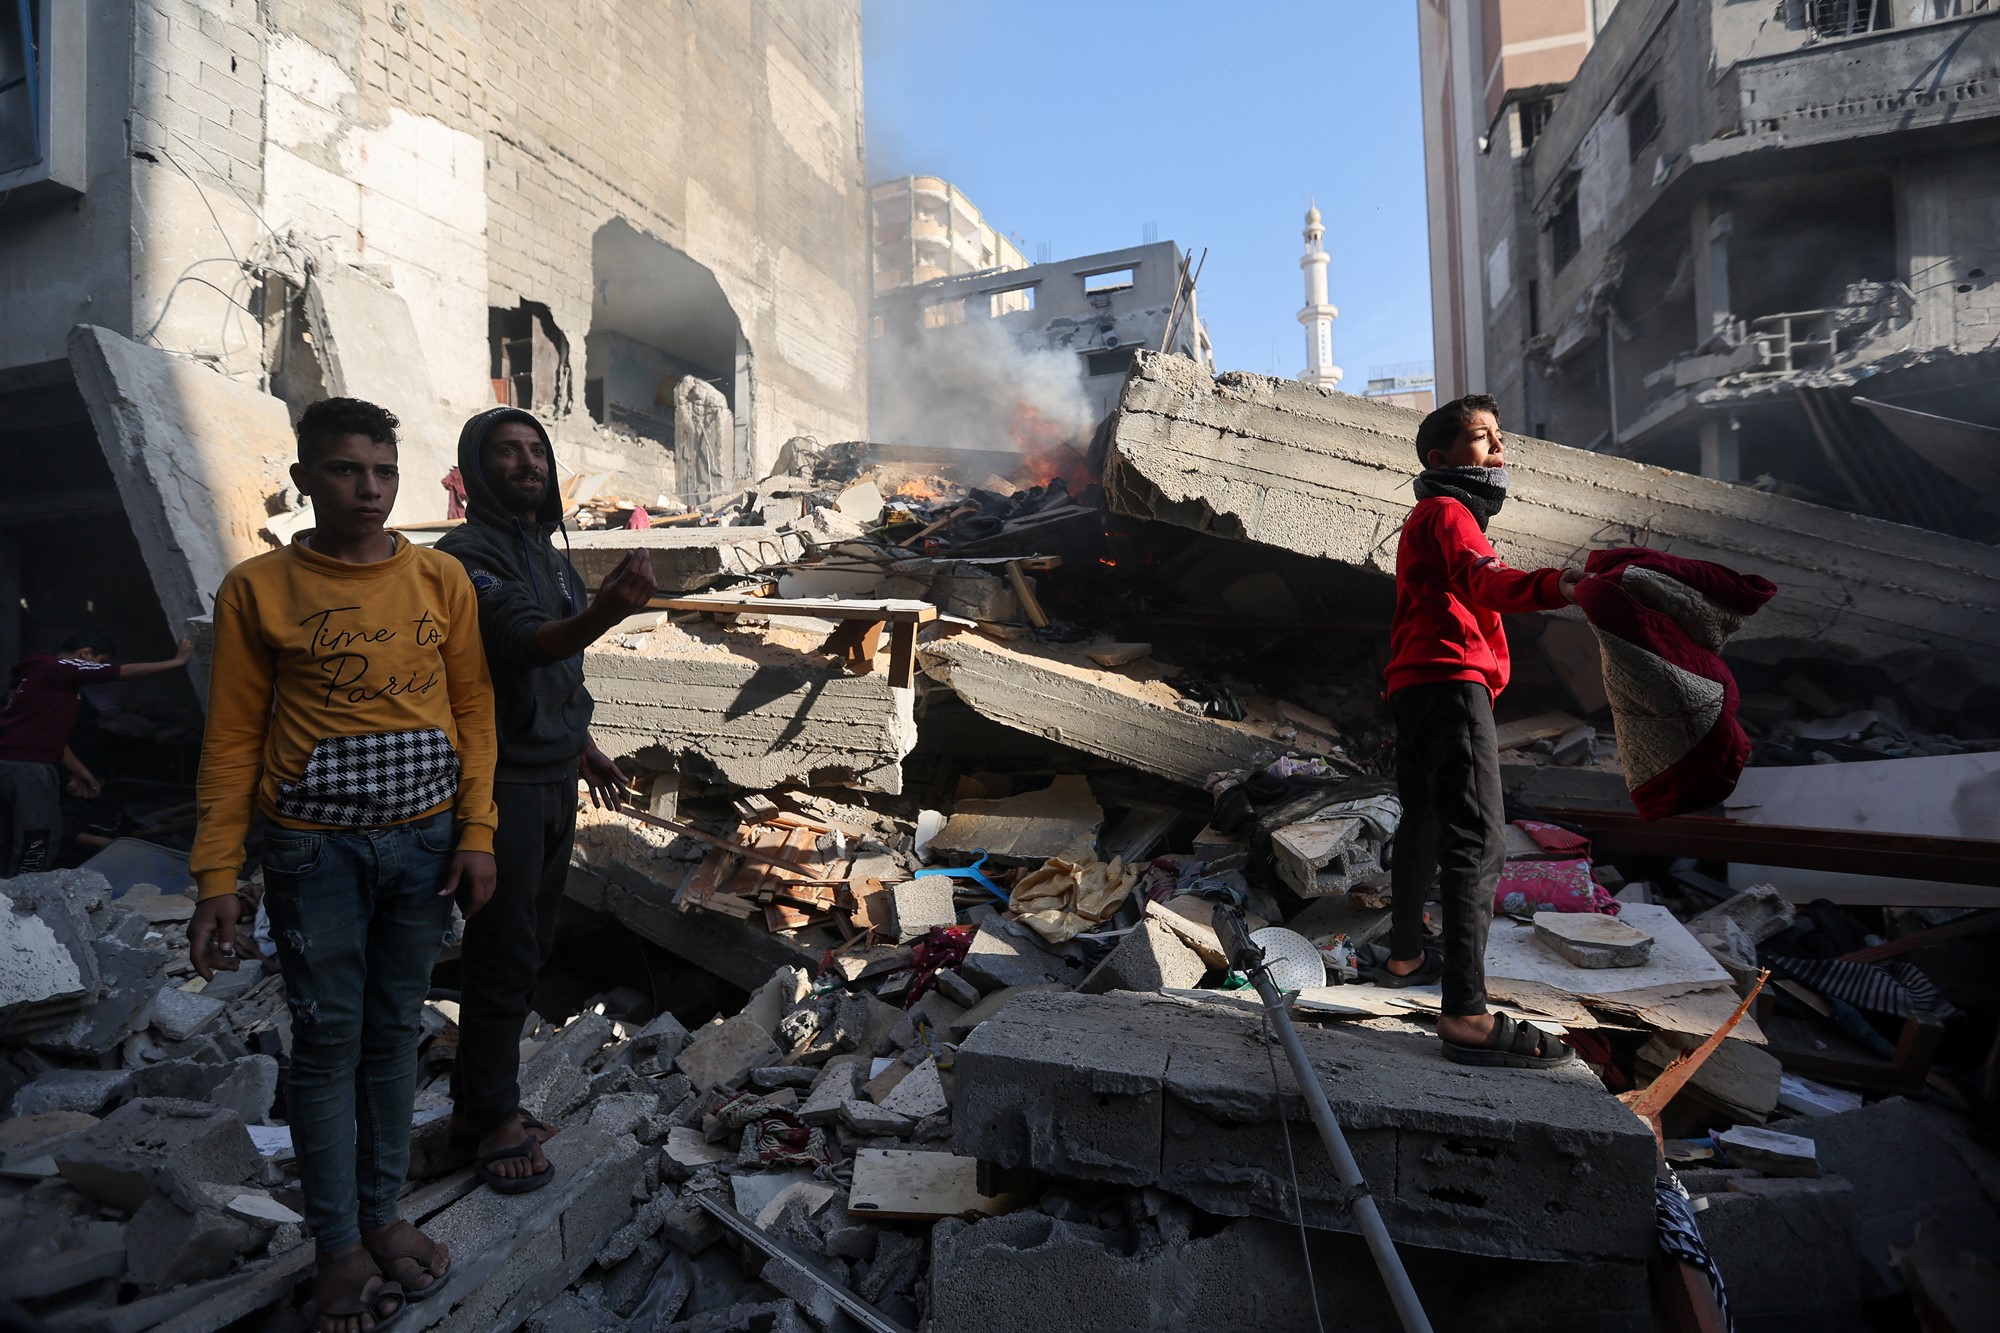 Three children standing amongst rubble with a small fire inside.